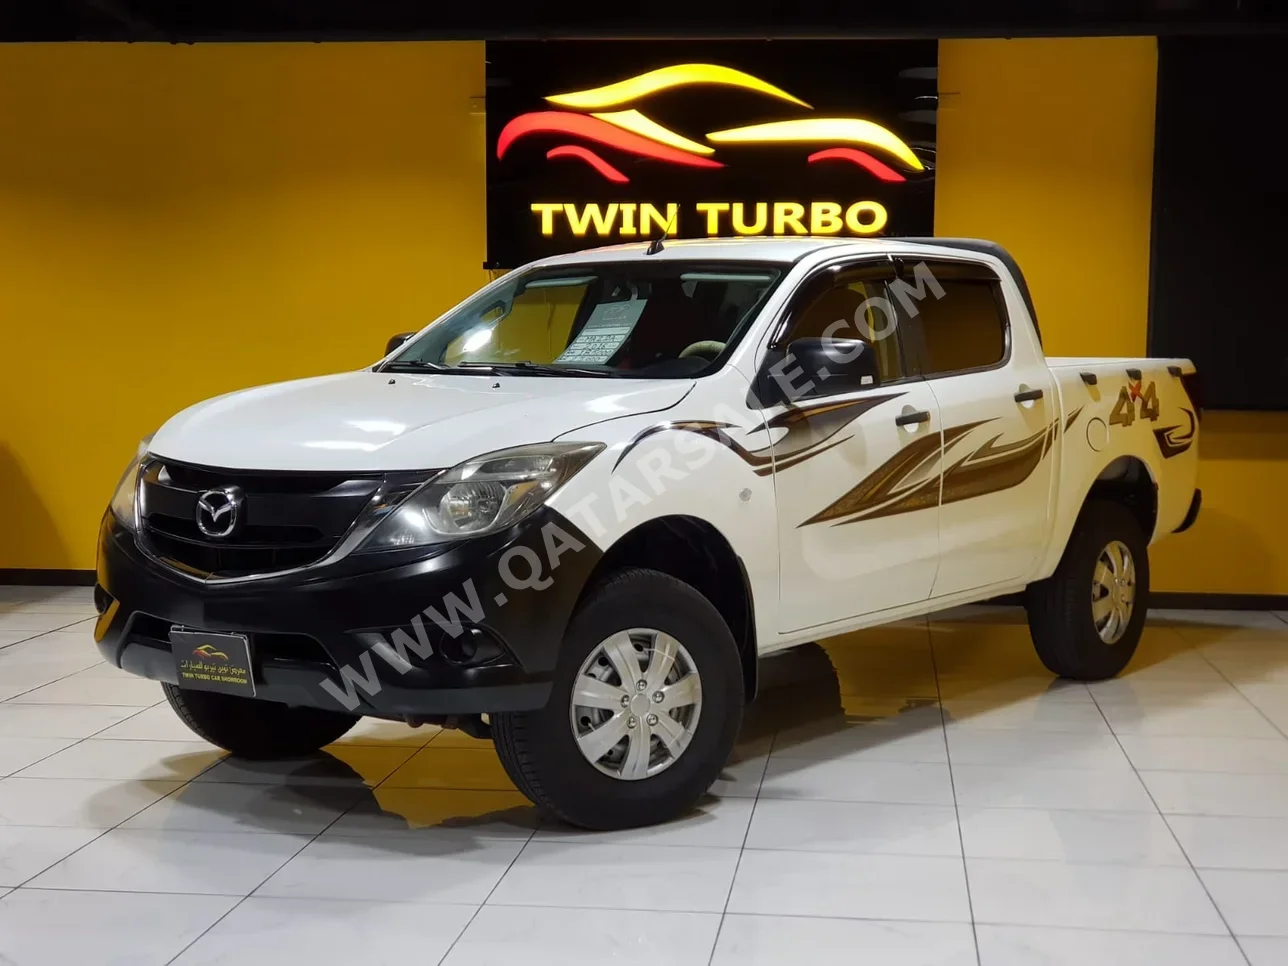 Mazda  BT-50  2016  Manual  185,000 Km  4 Cylinder  Front Wheel Drive (FWD)  Pick Up  White